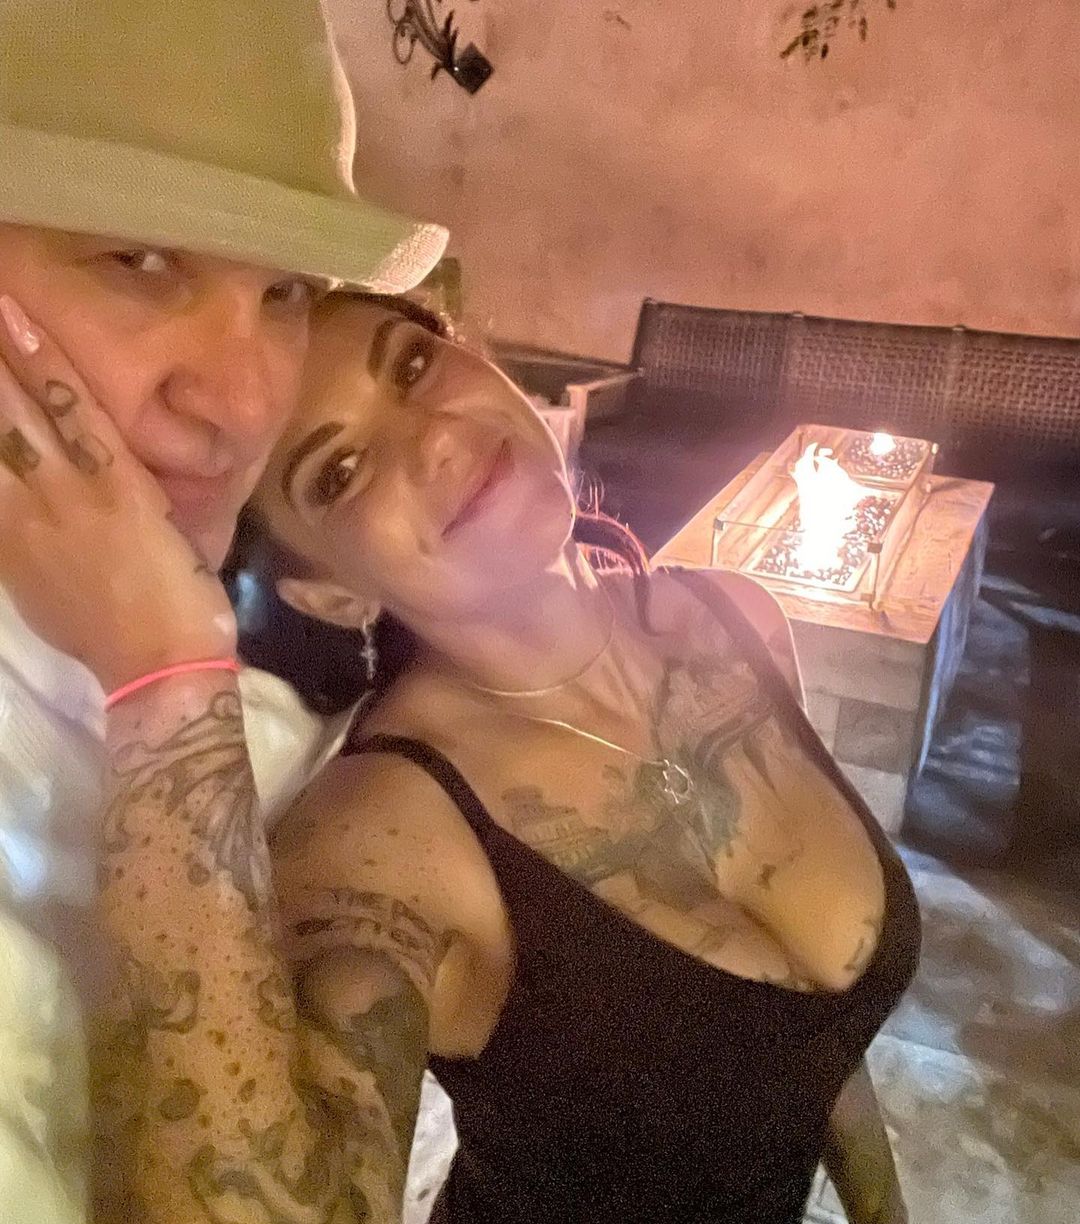 TV star Jesse James admits to texting ex but denies cheating on pregnant wife Bonnie Rotten